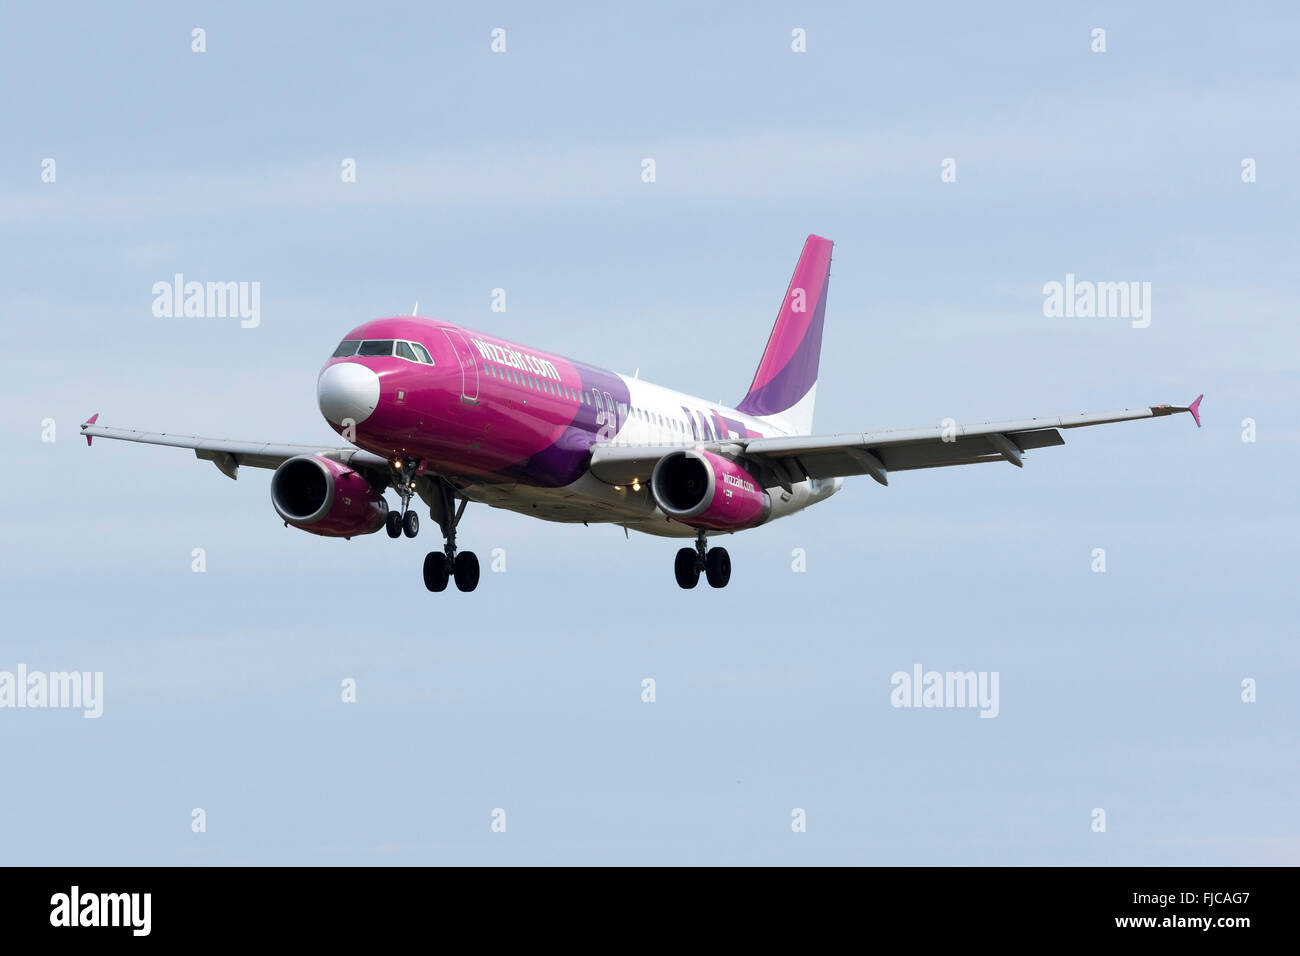 Wizz Air Airbus A320-232 [HA-LWI] on finals for runway 31, with a replaced white nose cone. Stock Photo